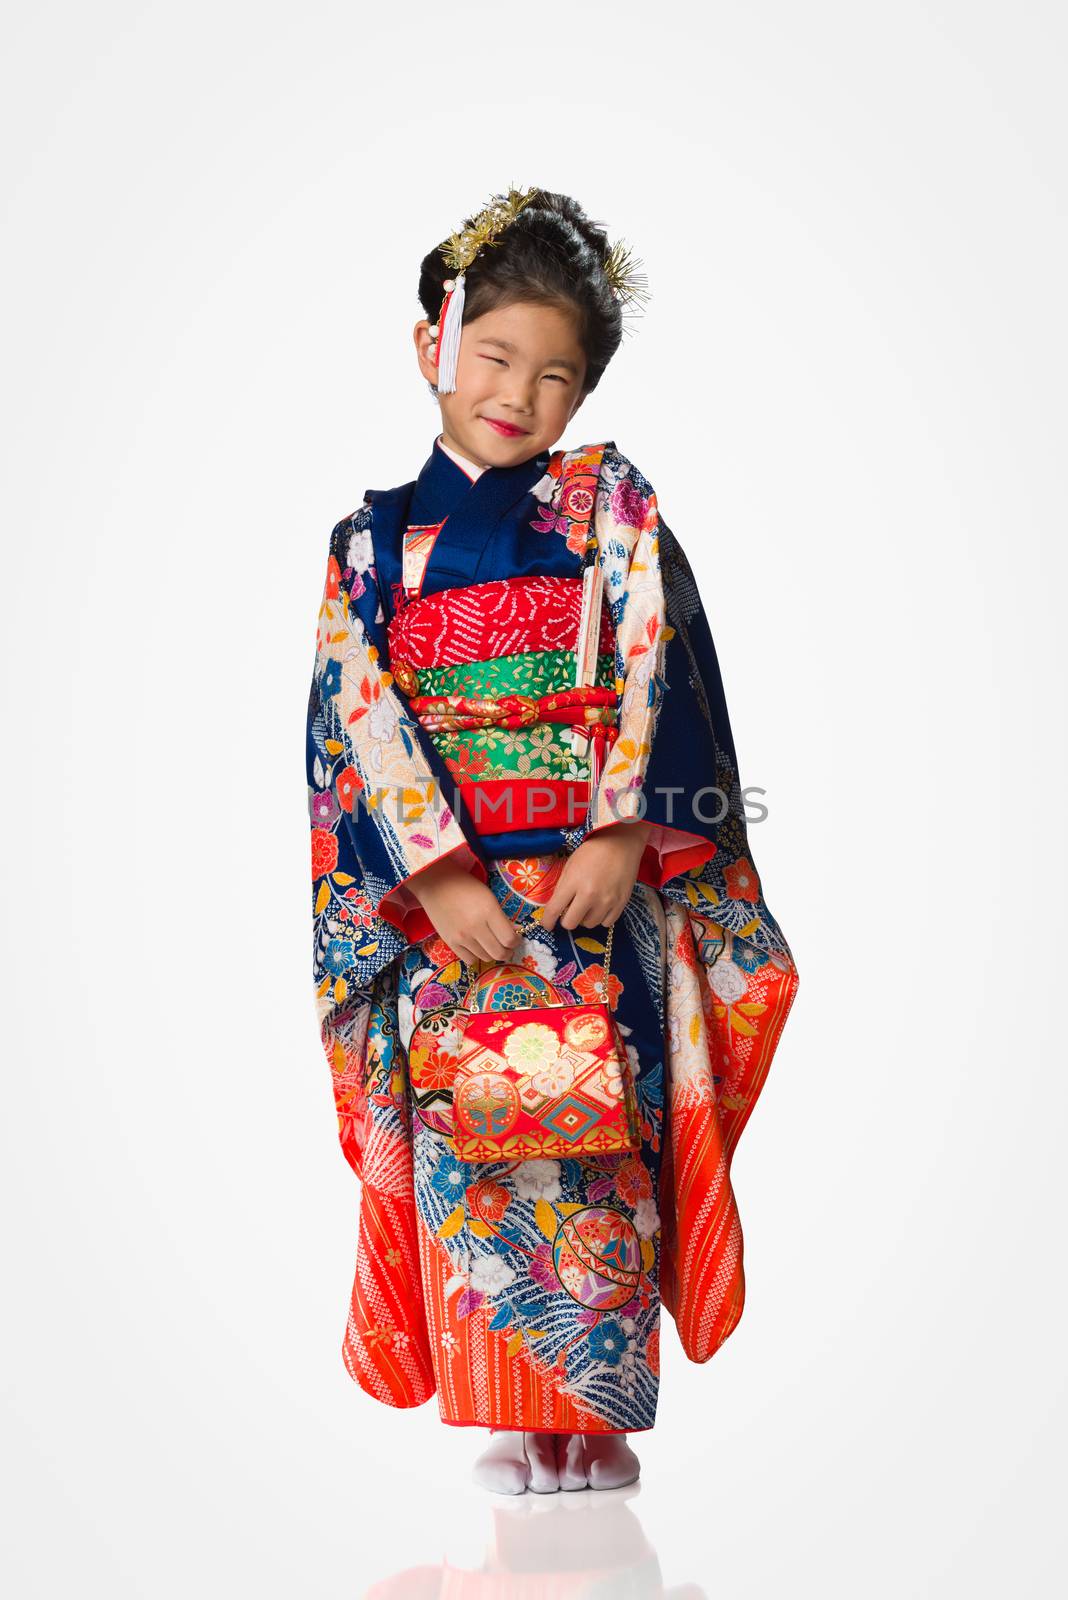 Young Girl in Kimono on White by justtscott